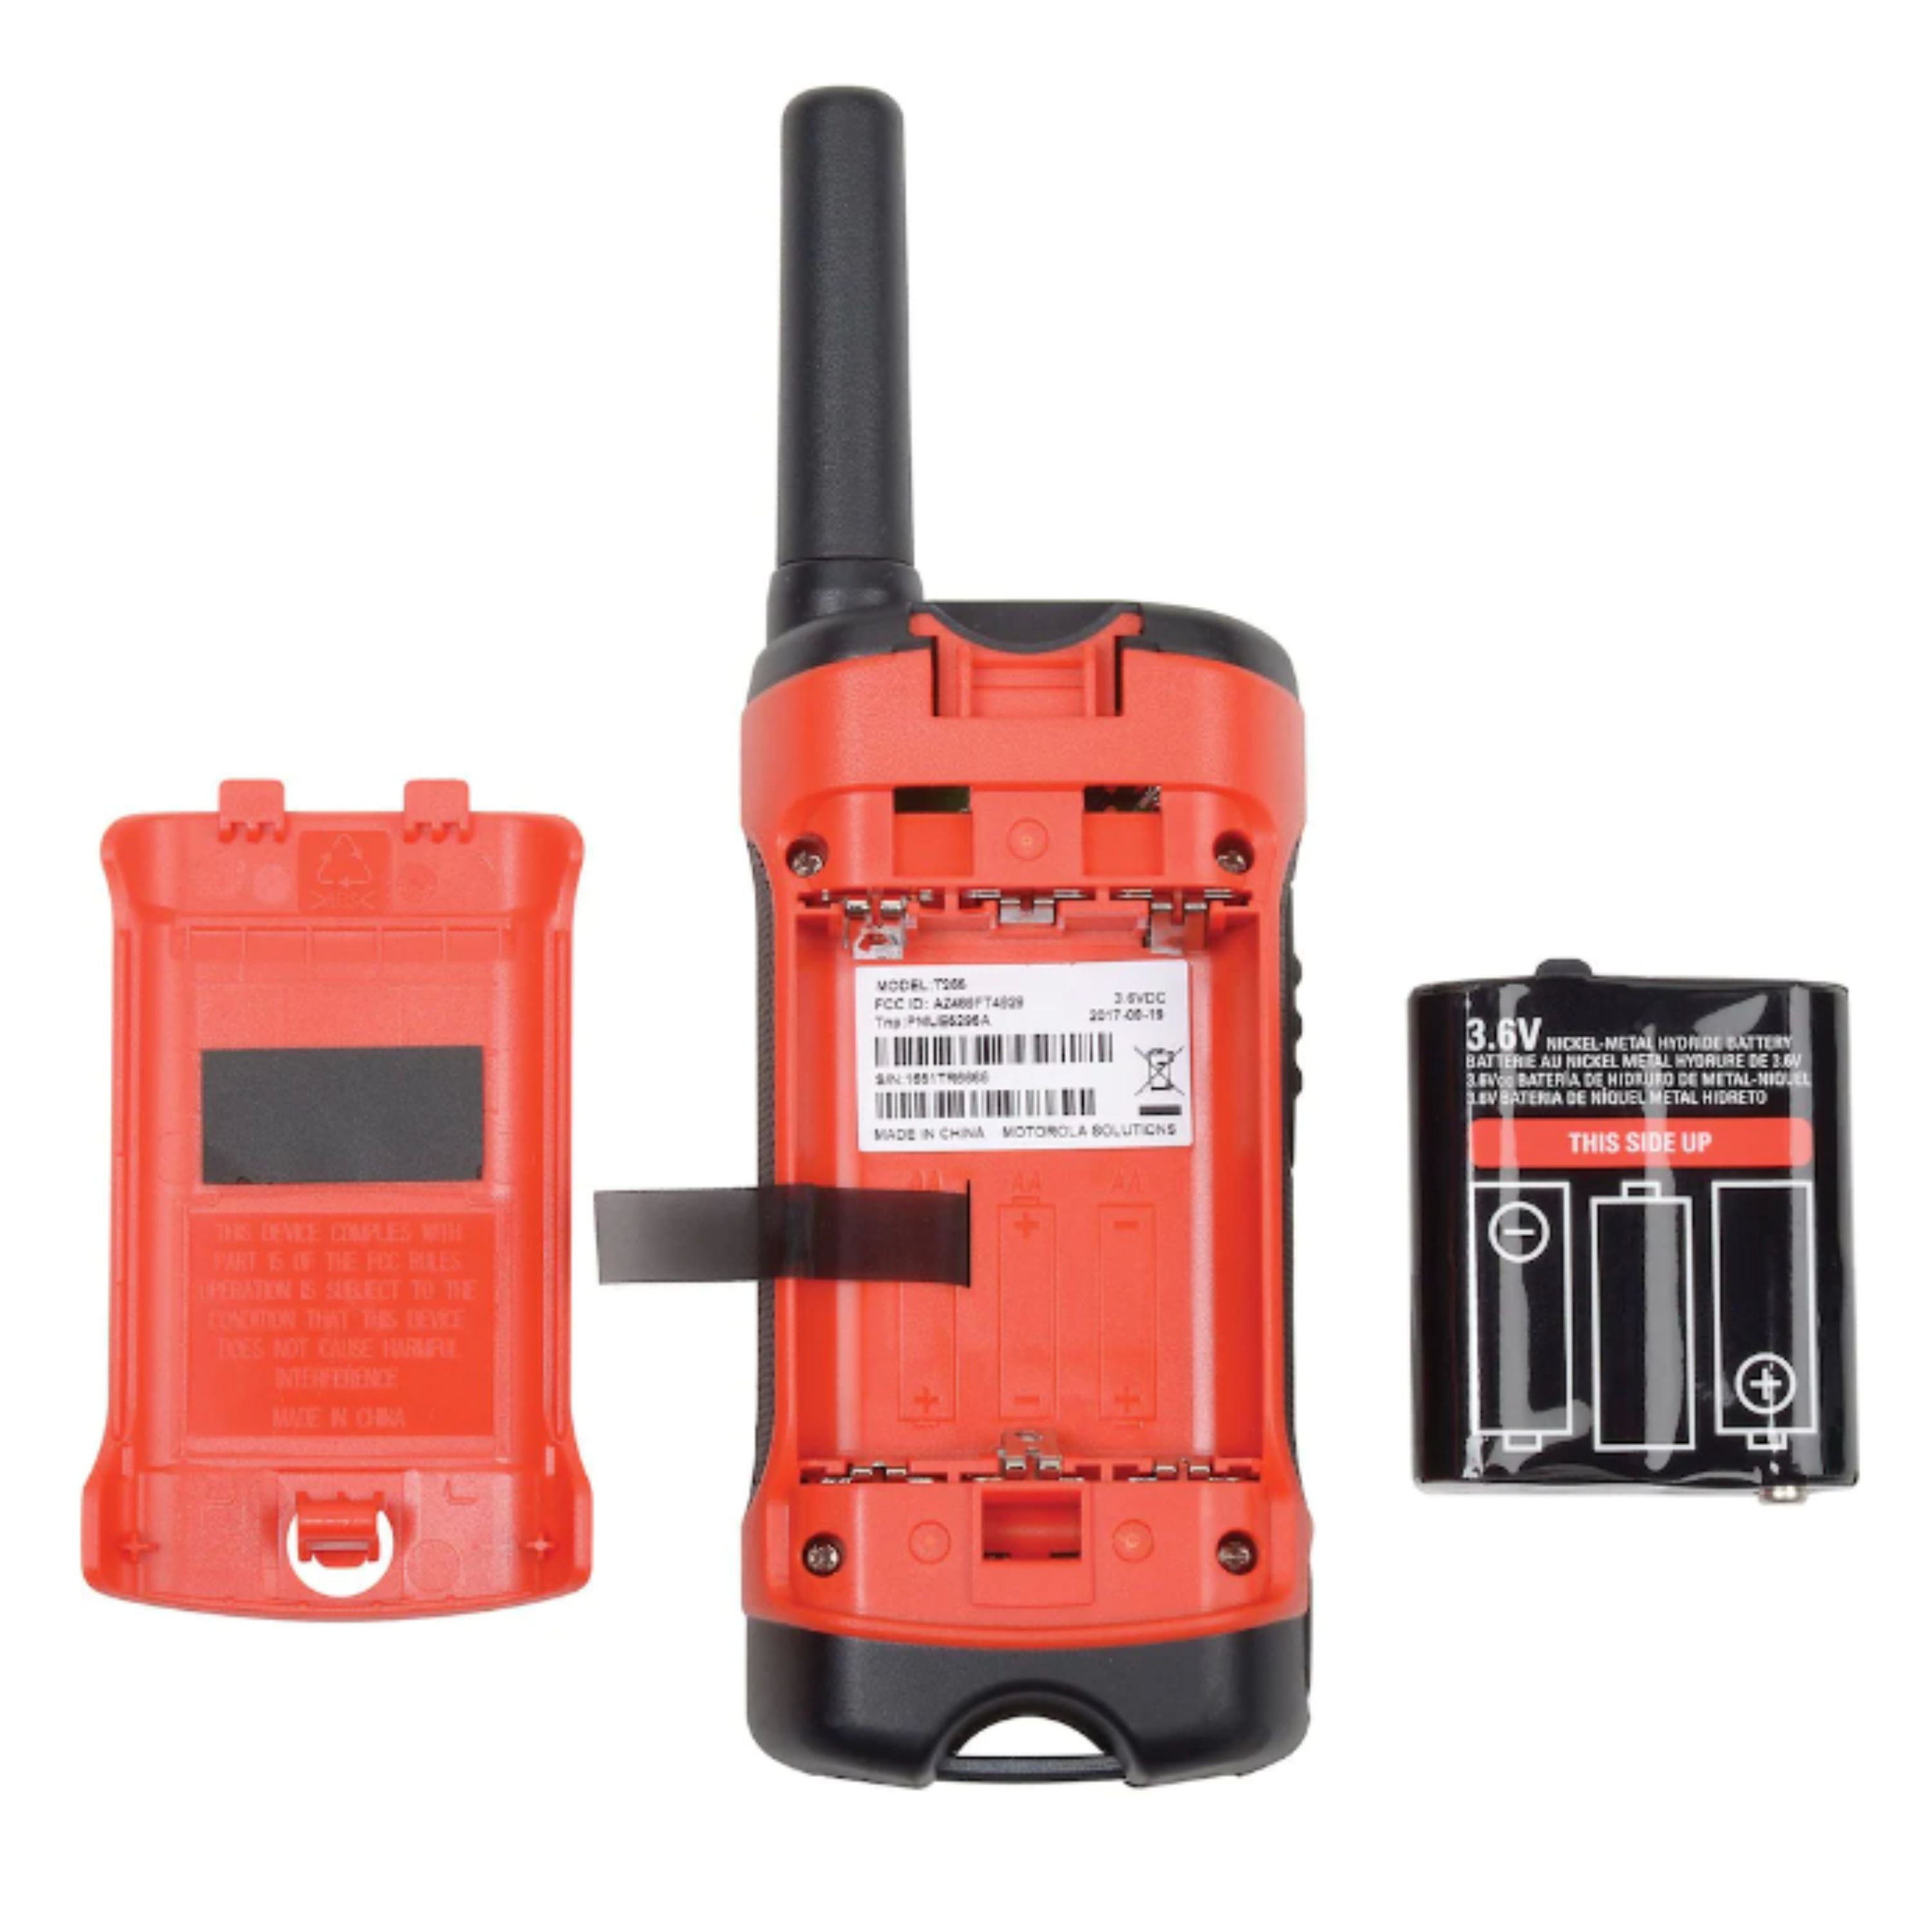 "T265 Talkabout" Two-way radios